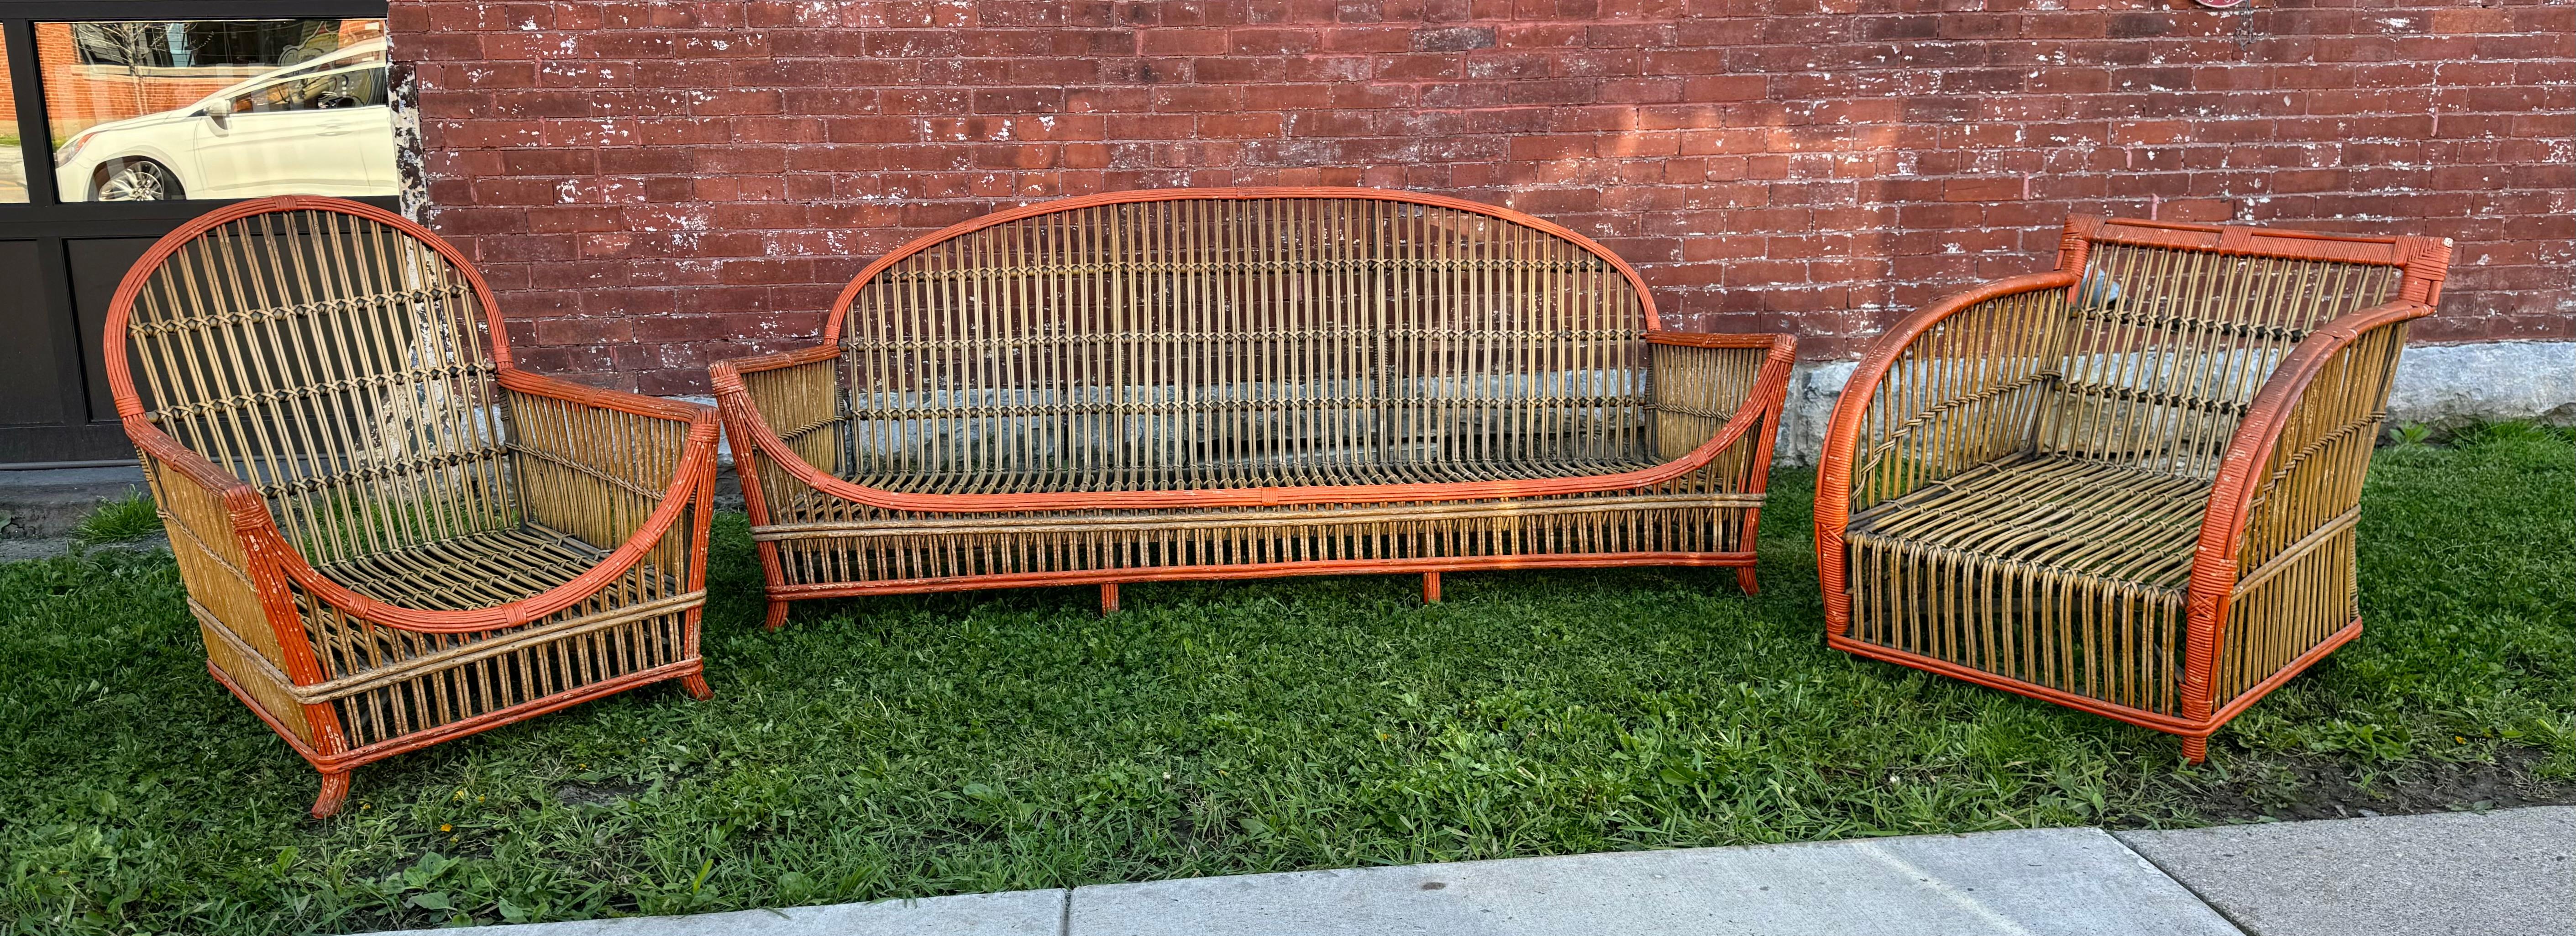 1930's Art Deco  3-Piece / Stick wICKER / Split Reed Sofa and Chairs, Ypsilanti  In Good Condition For Sale In Buffalo, NY